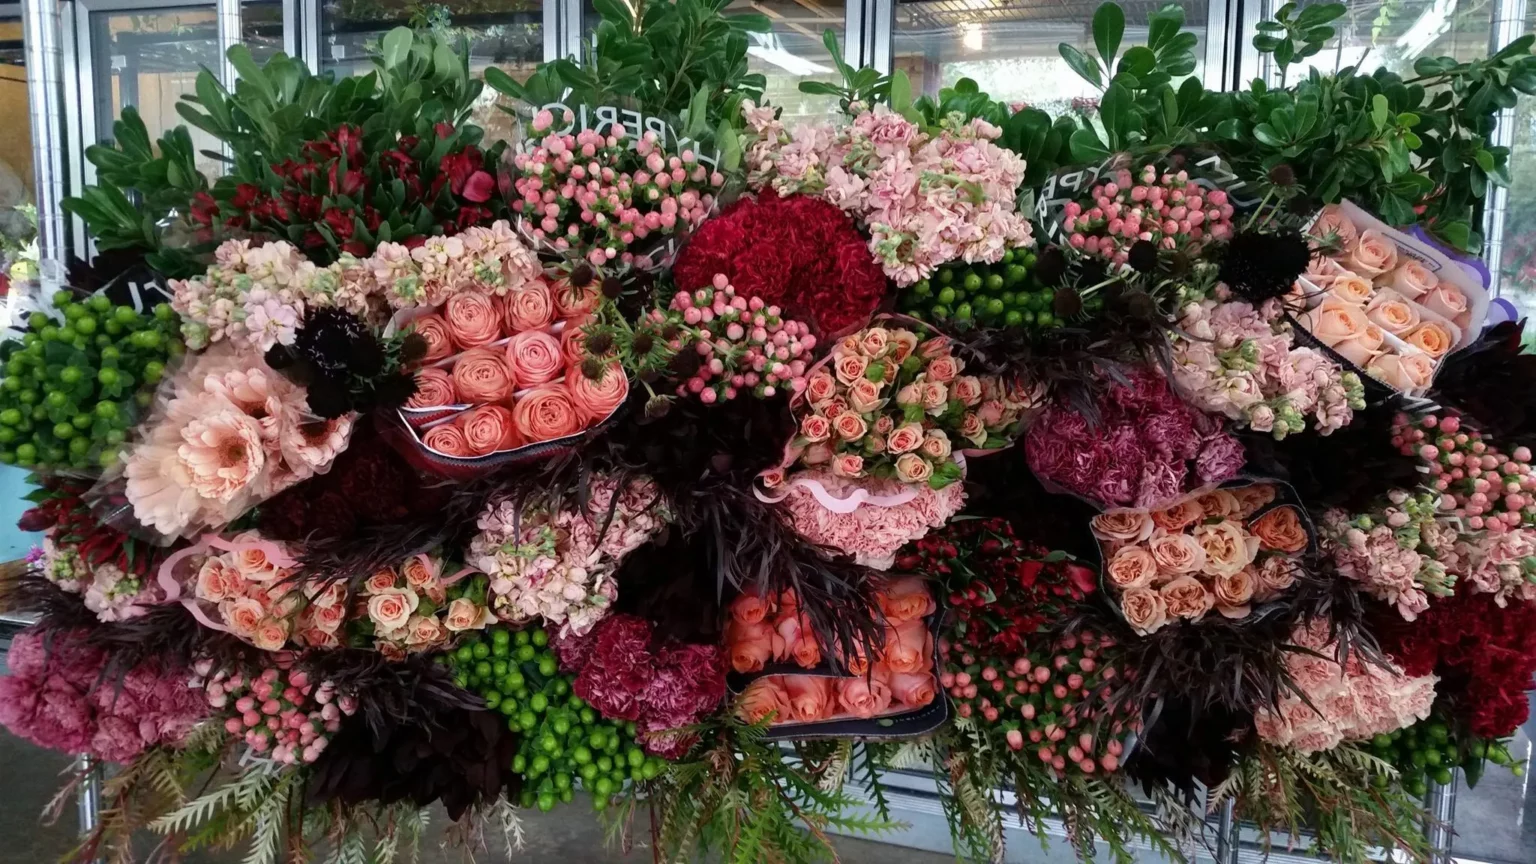 Most Popular Types of Wholesale Flowers